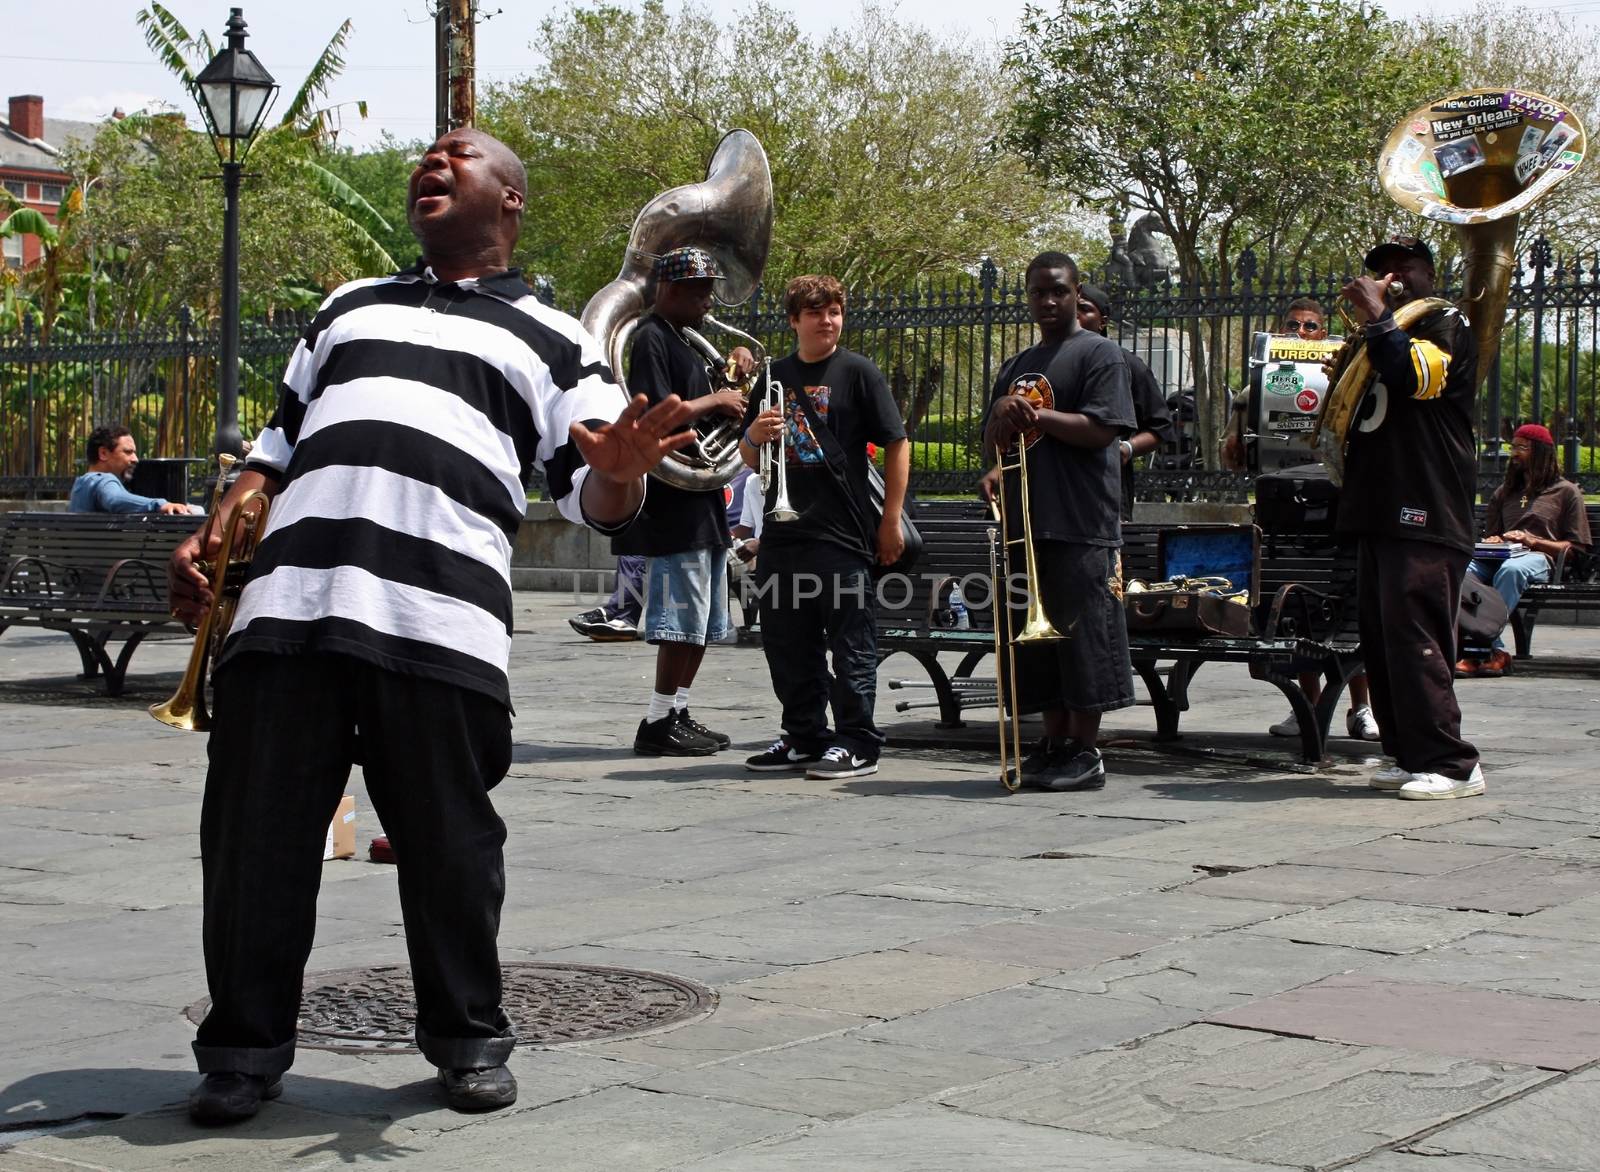 NEW ORLEANS, LOUISIANA - April 13: A jazz band plays in Jackson Square April 13, 2009 in New Orleans, Louisiana after recovery from hurricane Katrina just before the Jazz and Heritage Festival.

